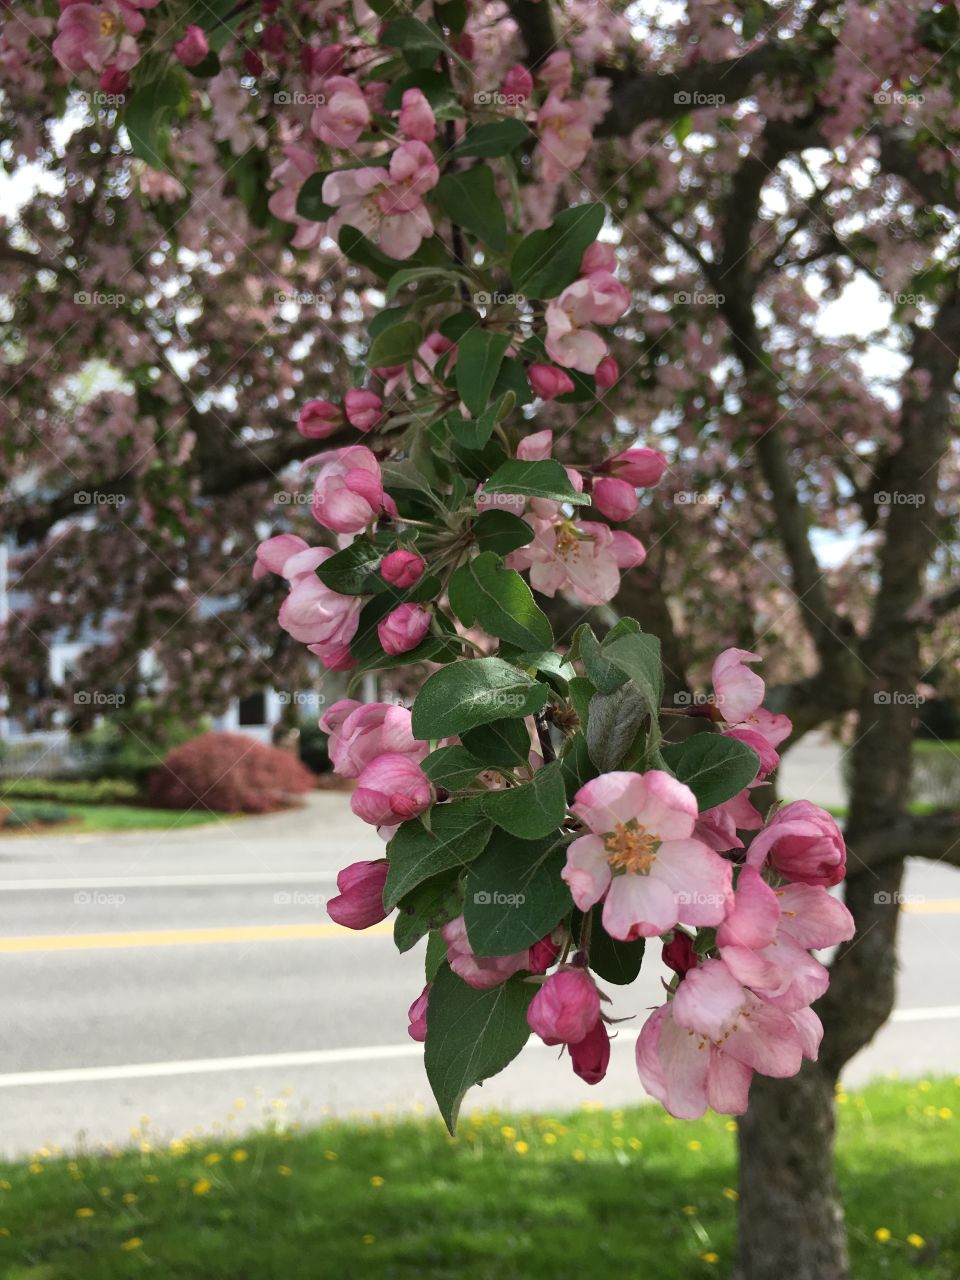 Blossoms in CT in early May